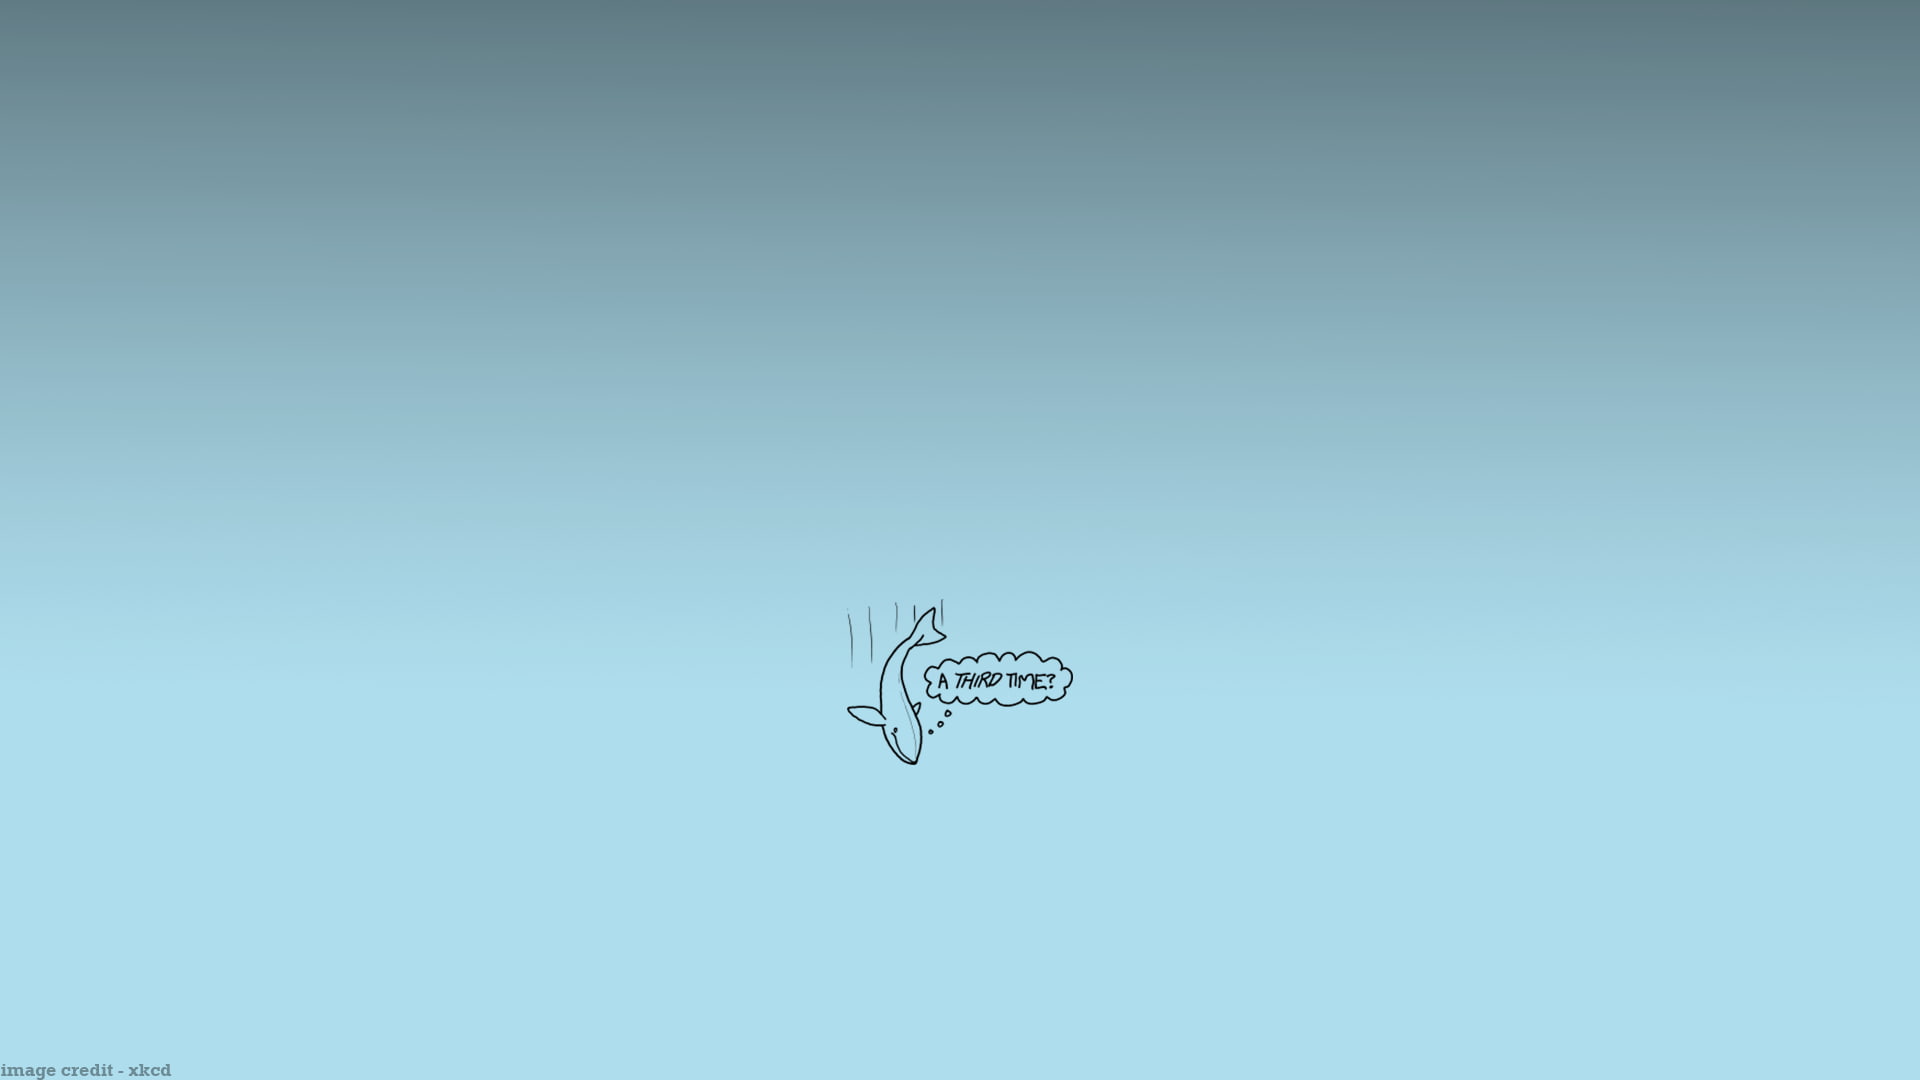 HD Wallpaper Xkcd S Copy Space Blue No People Representation